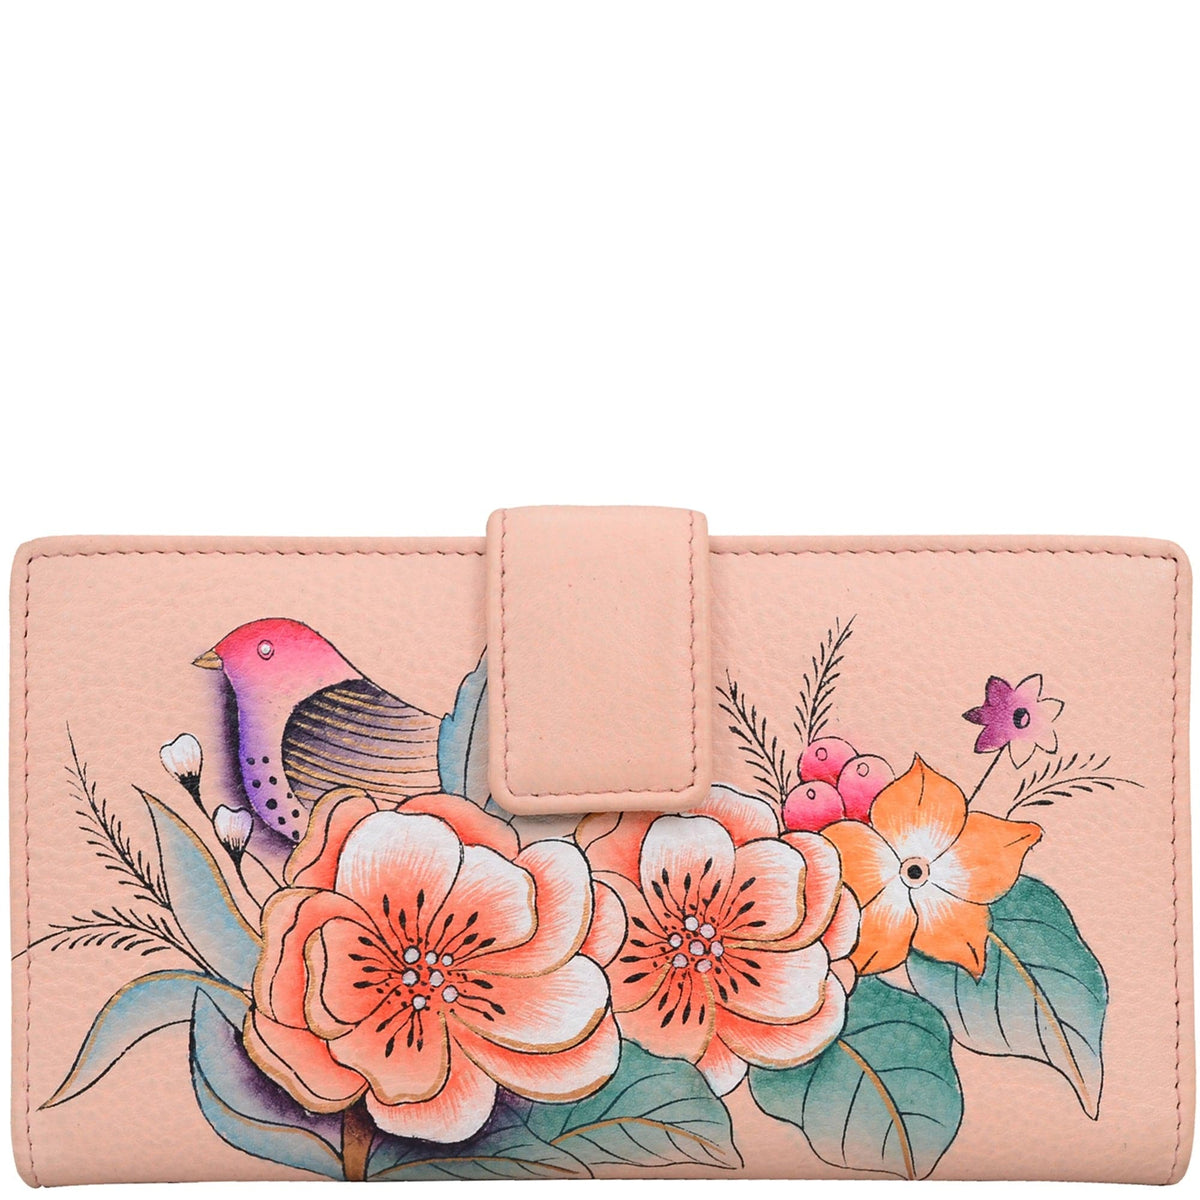 Anna by Anuschka style 1833, handpainted Two Fold Organizer Wallet. Vintage Garden painting in pink/peach color. Featuring built-in organizer with ten credit card holders.